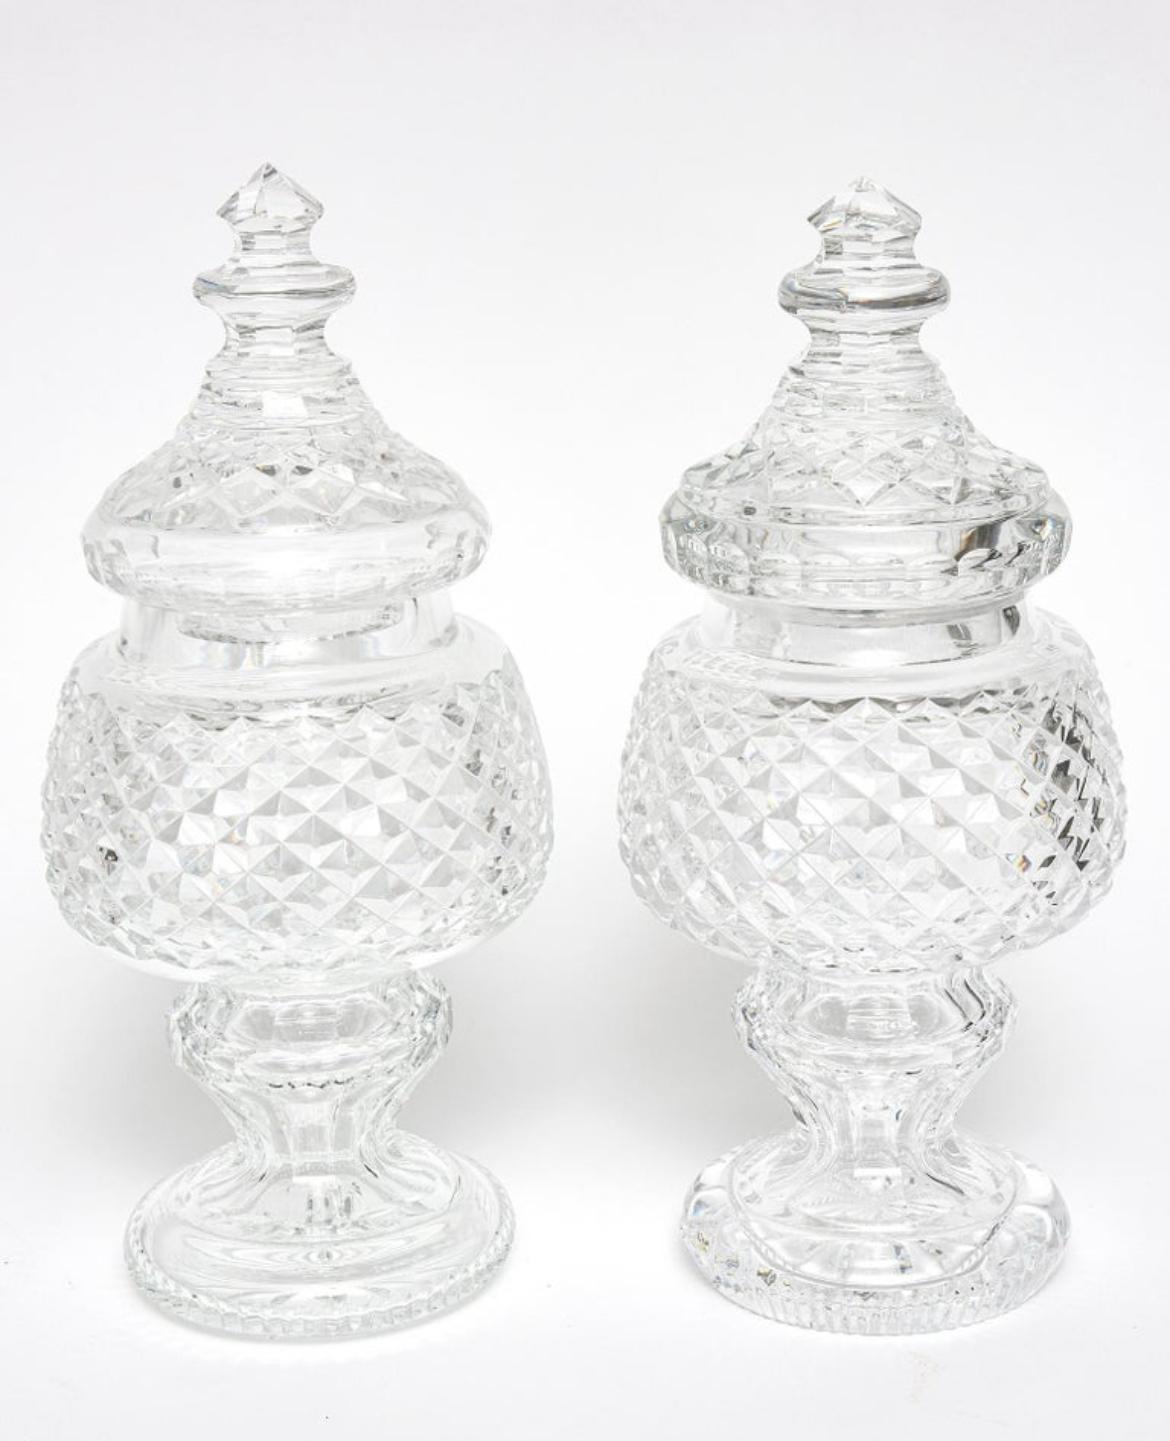 Pair of Waterford cut glass lead crystal horse racing lidded jars apothecary jar trophies.  Each are engraved an signed on the bottom.  Engravings are listed below.  They would look amazing on a holiday table.  
Both are in great condition.

1.